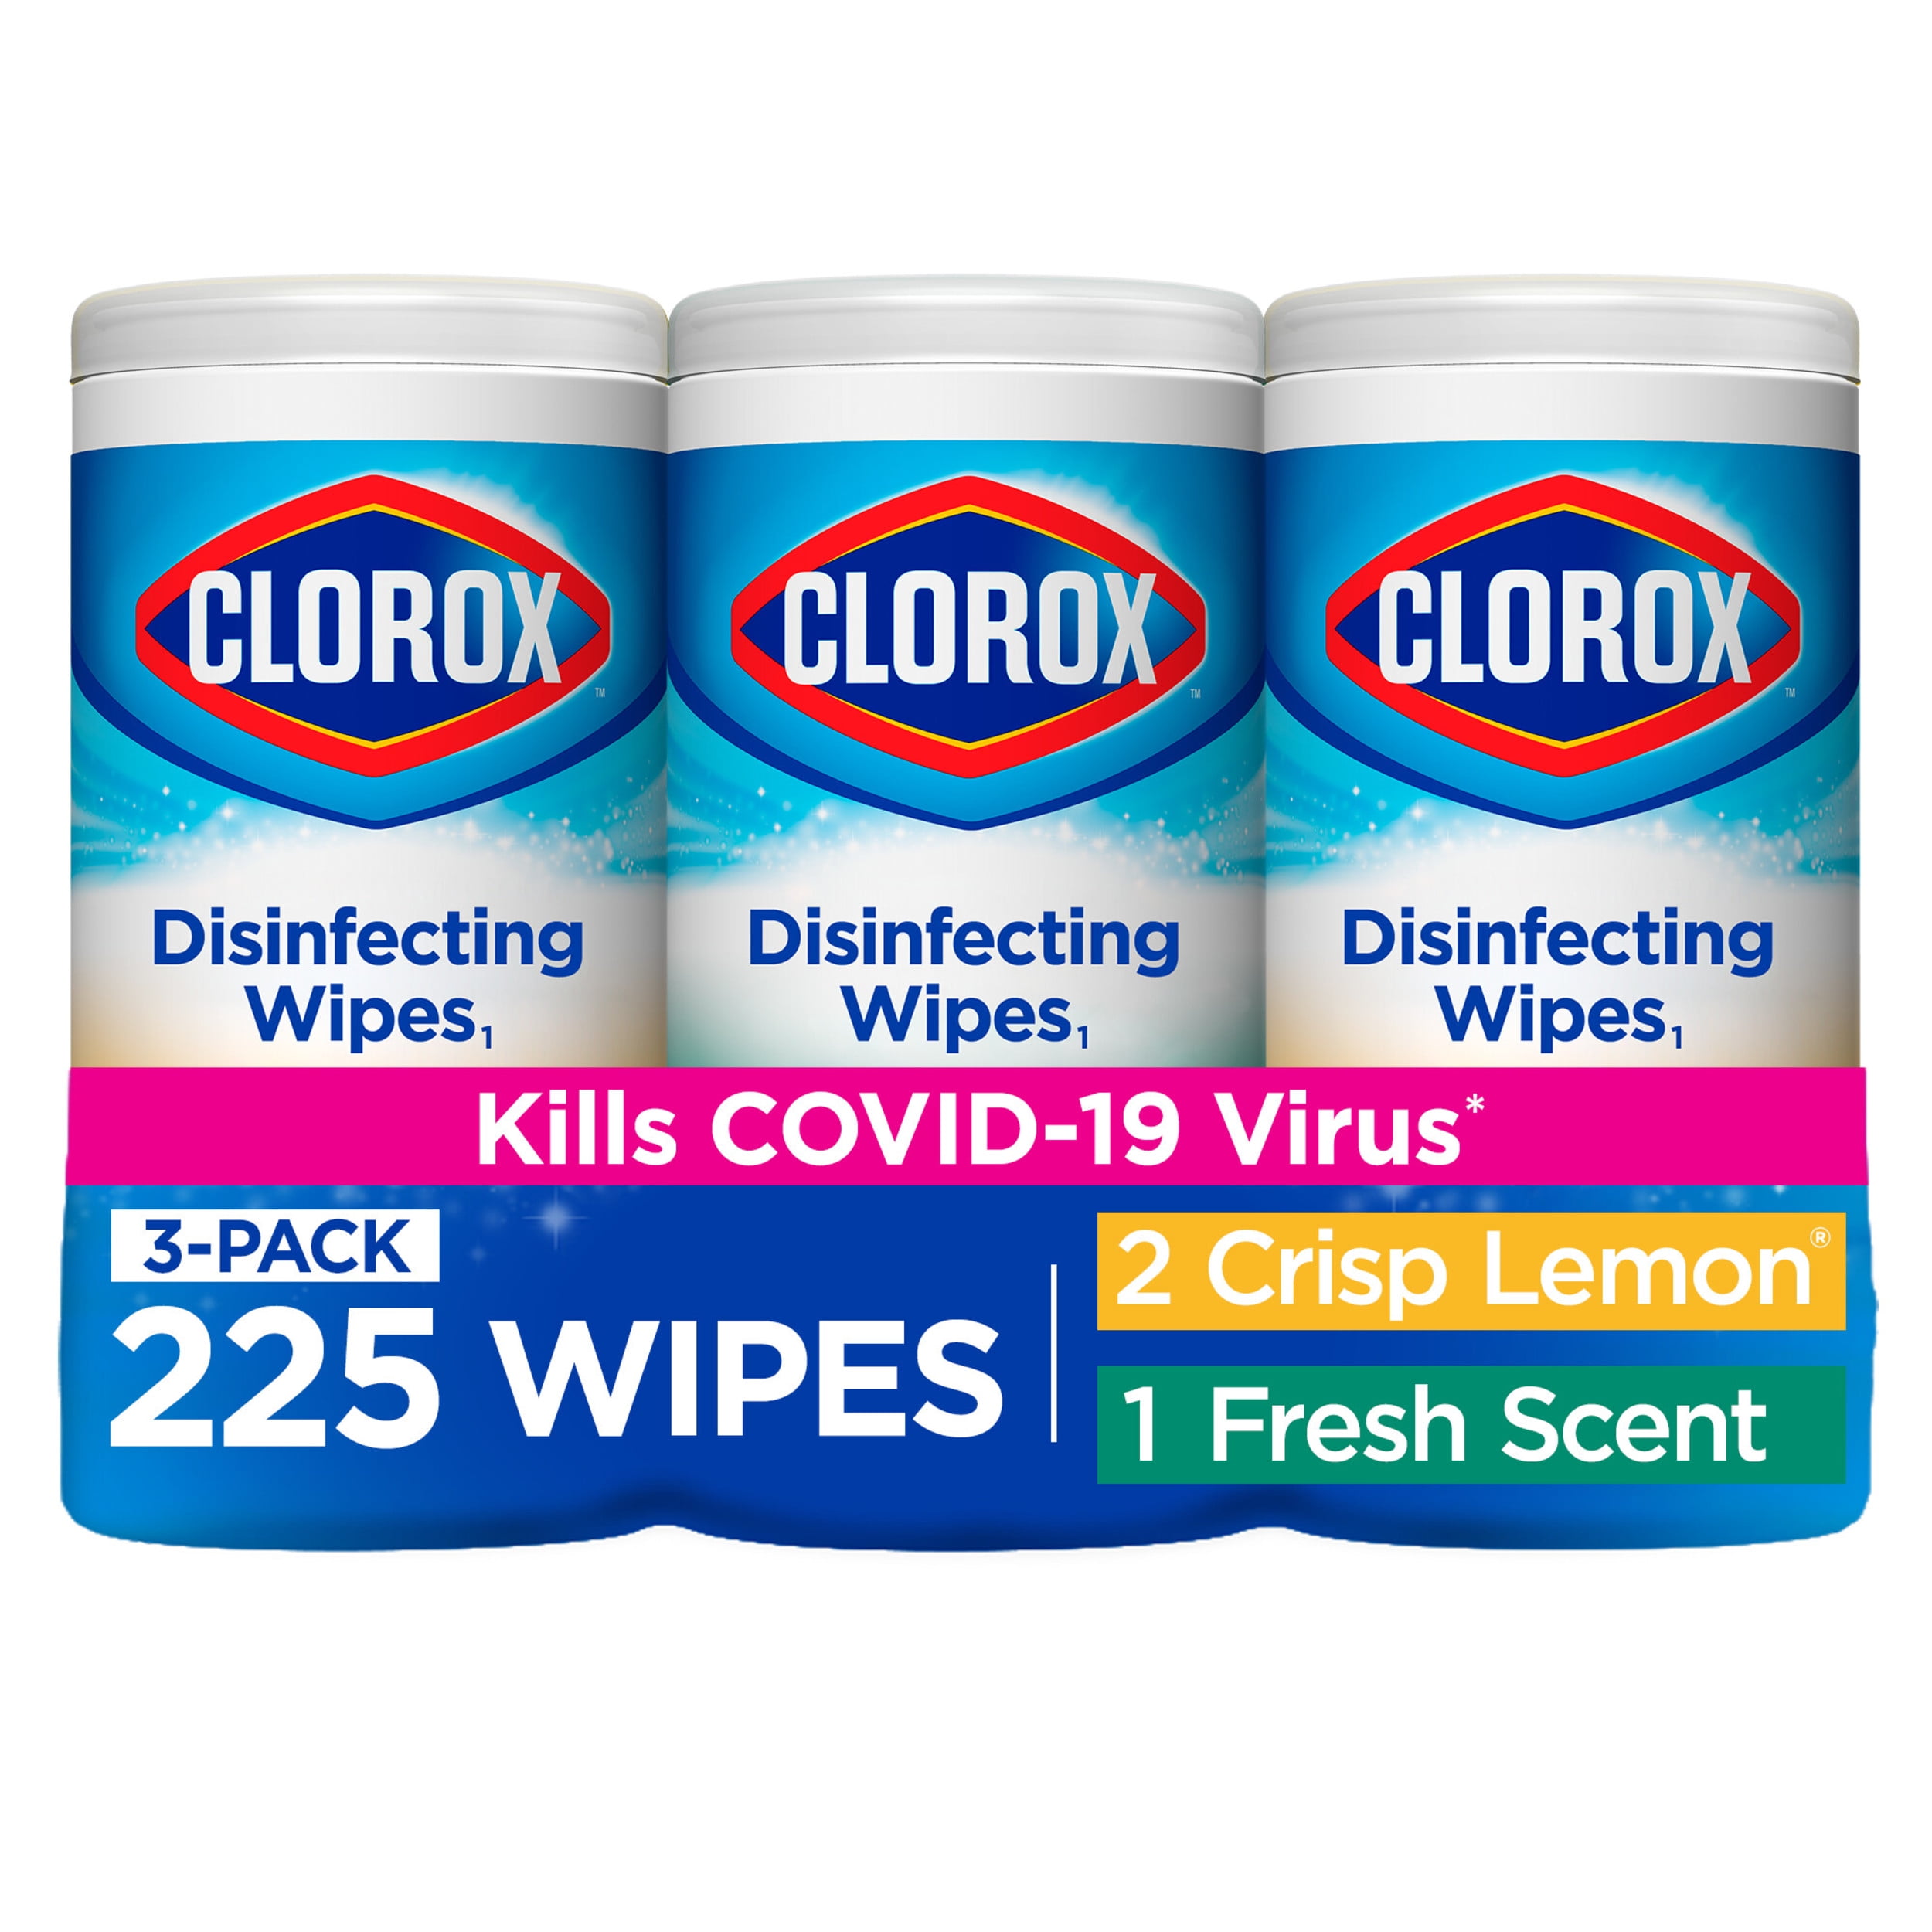 Clorox Disinfecting Wipes, Crisp Lemon and Fresh Scent, 225 Count, 3 Pack